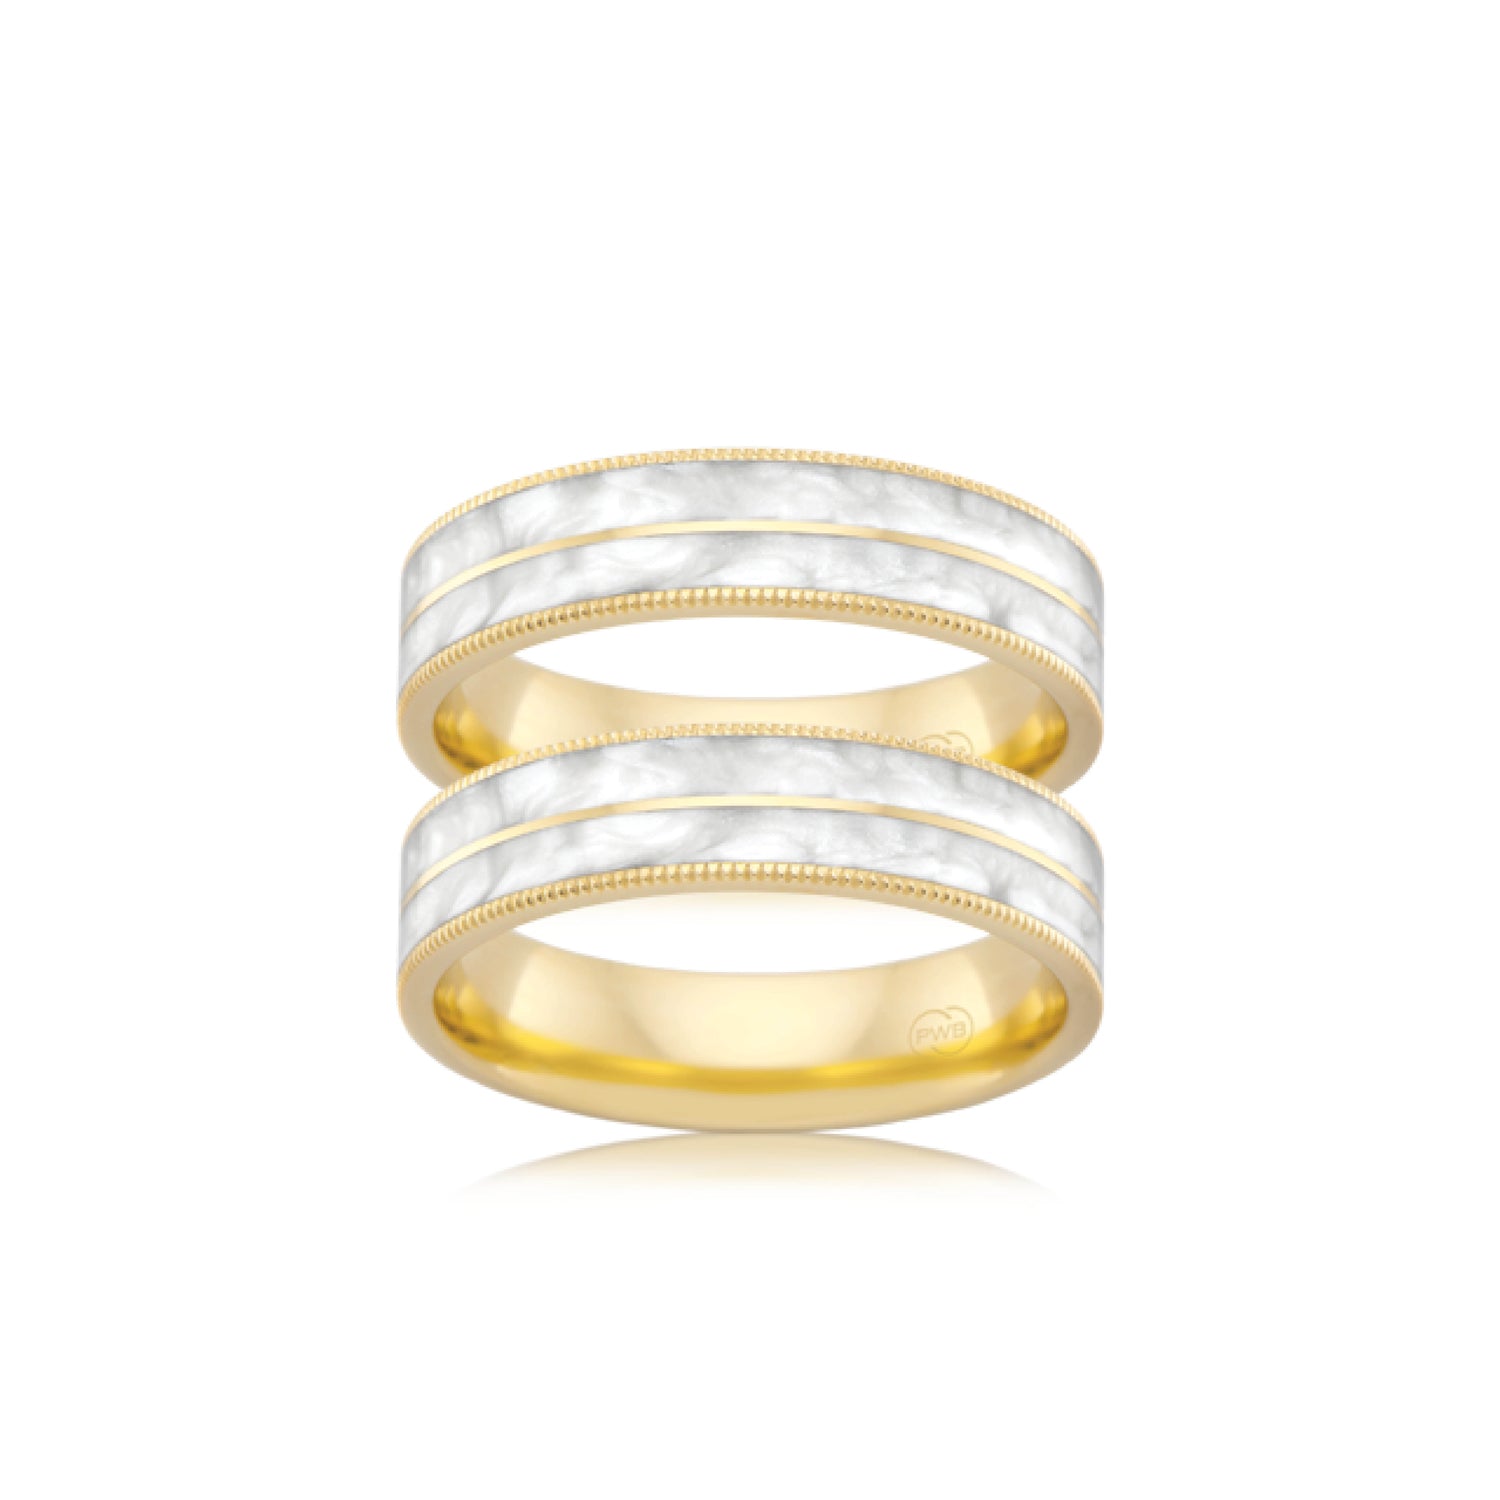 Yellow gold and mother of pearl wedding ring